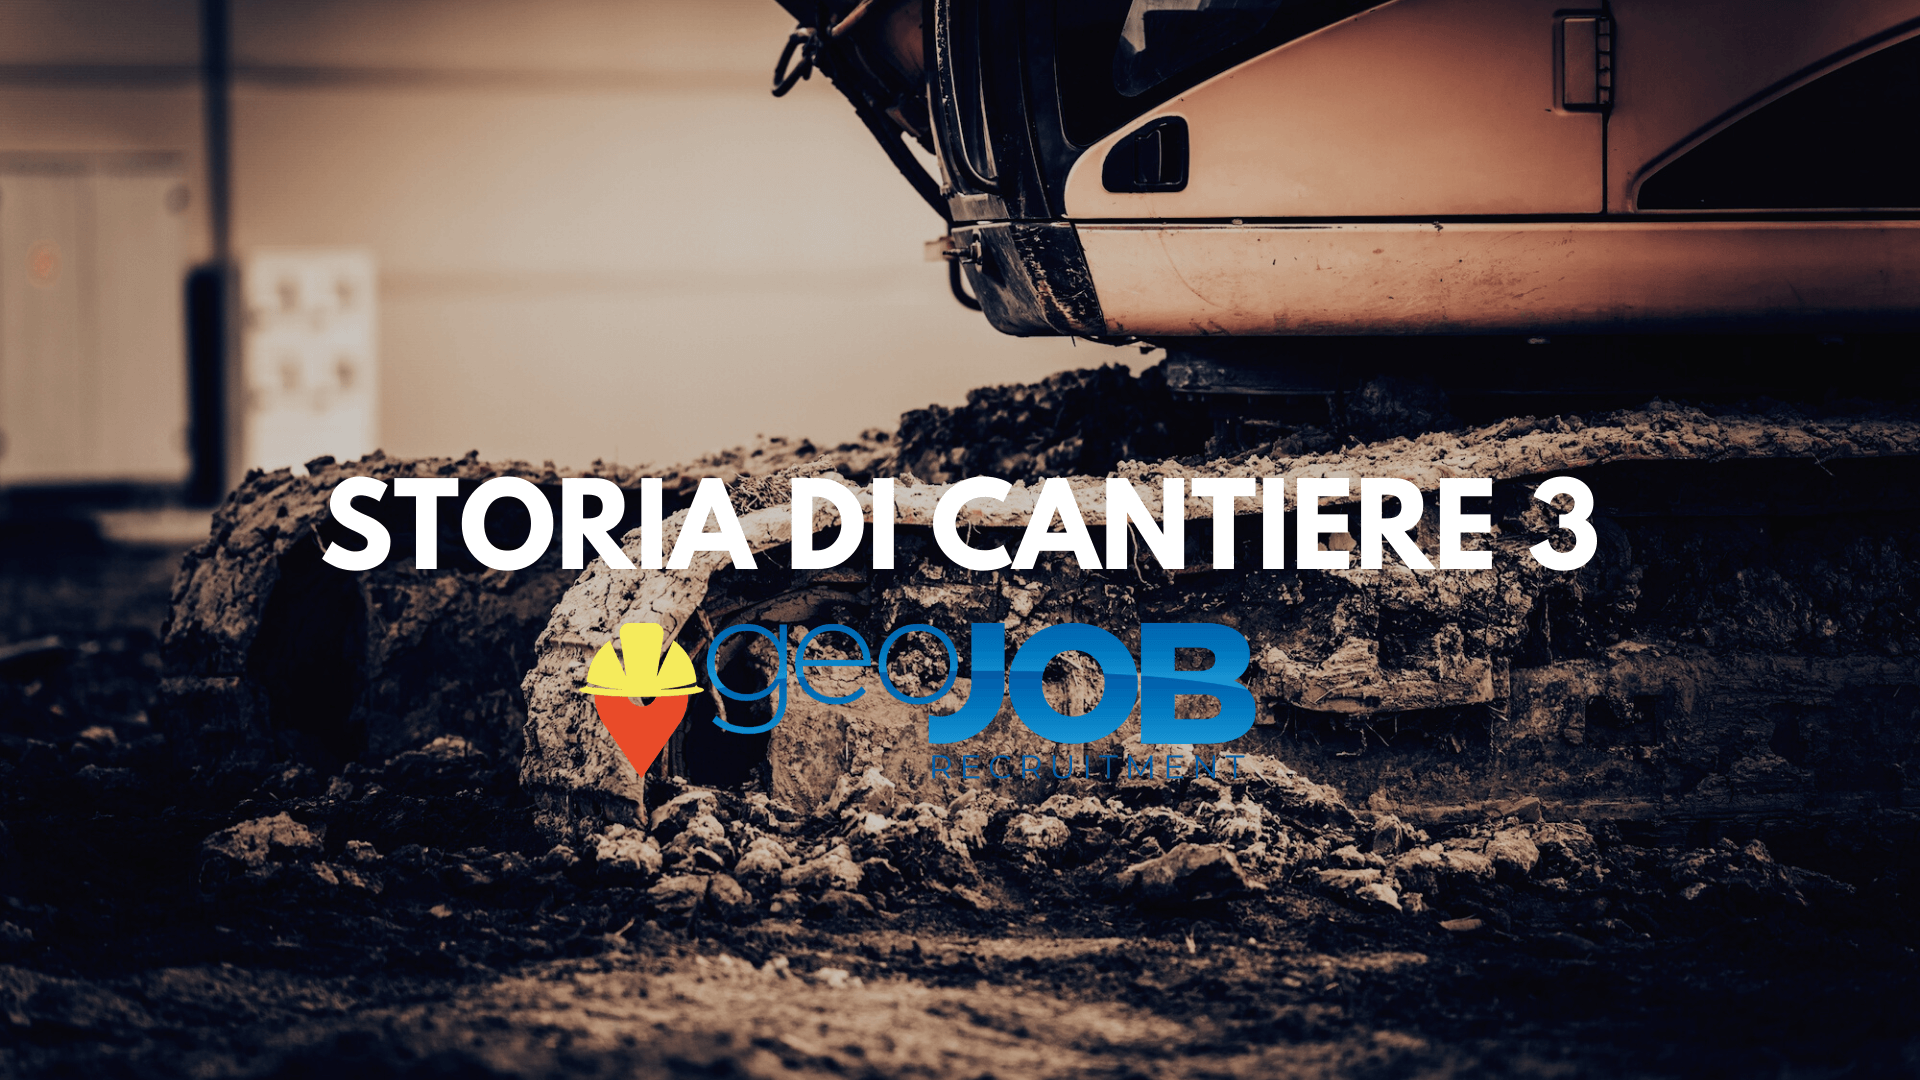 Storie di Cantiere #3